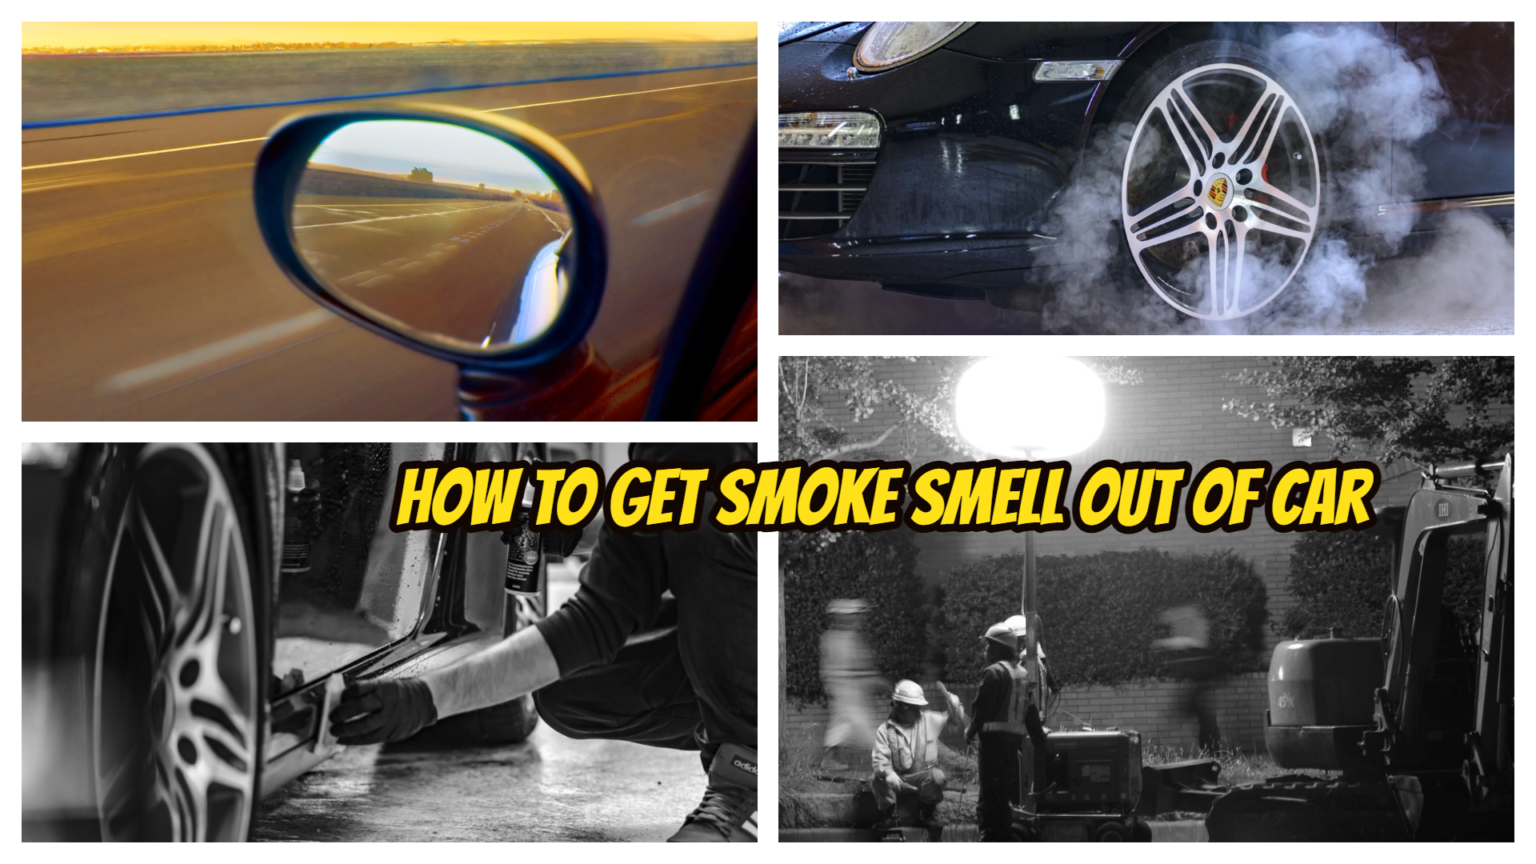 How to Get Smoke Smell Out of Car in 3 Simple Steps